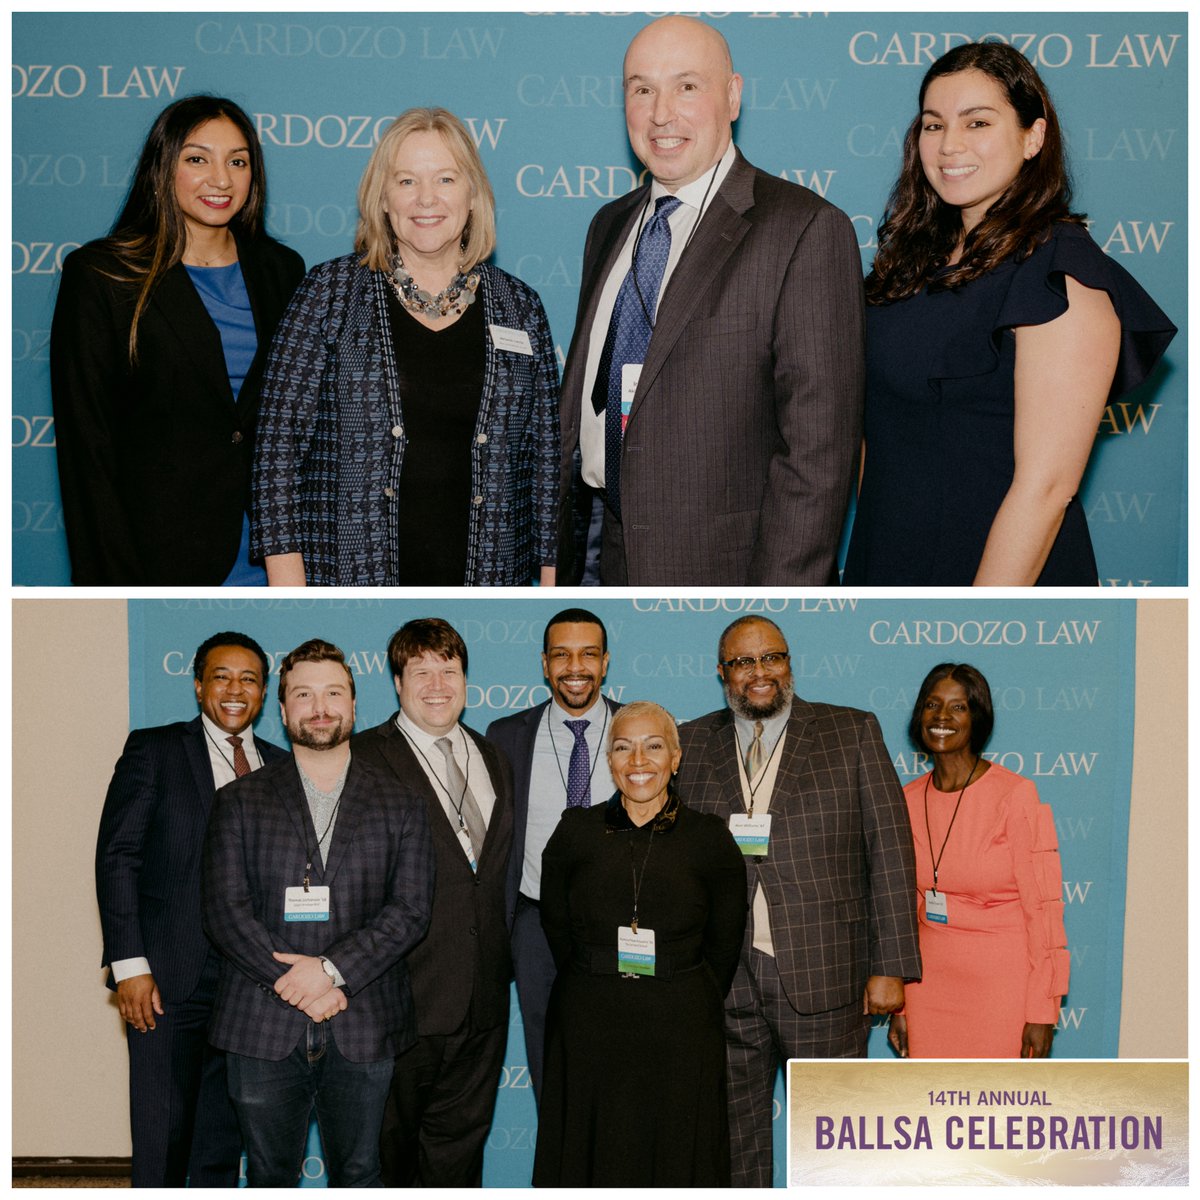 The 14th Annual BALLSA Celebration honored Kwanza Jones, Class of 1999, for her commitment to increasing equity and inclusion in education and the legal and business professions. It was the highest-grossing BALLSA Celebration to date, raising $60,000. brnw.ch/21wHZ17